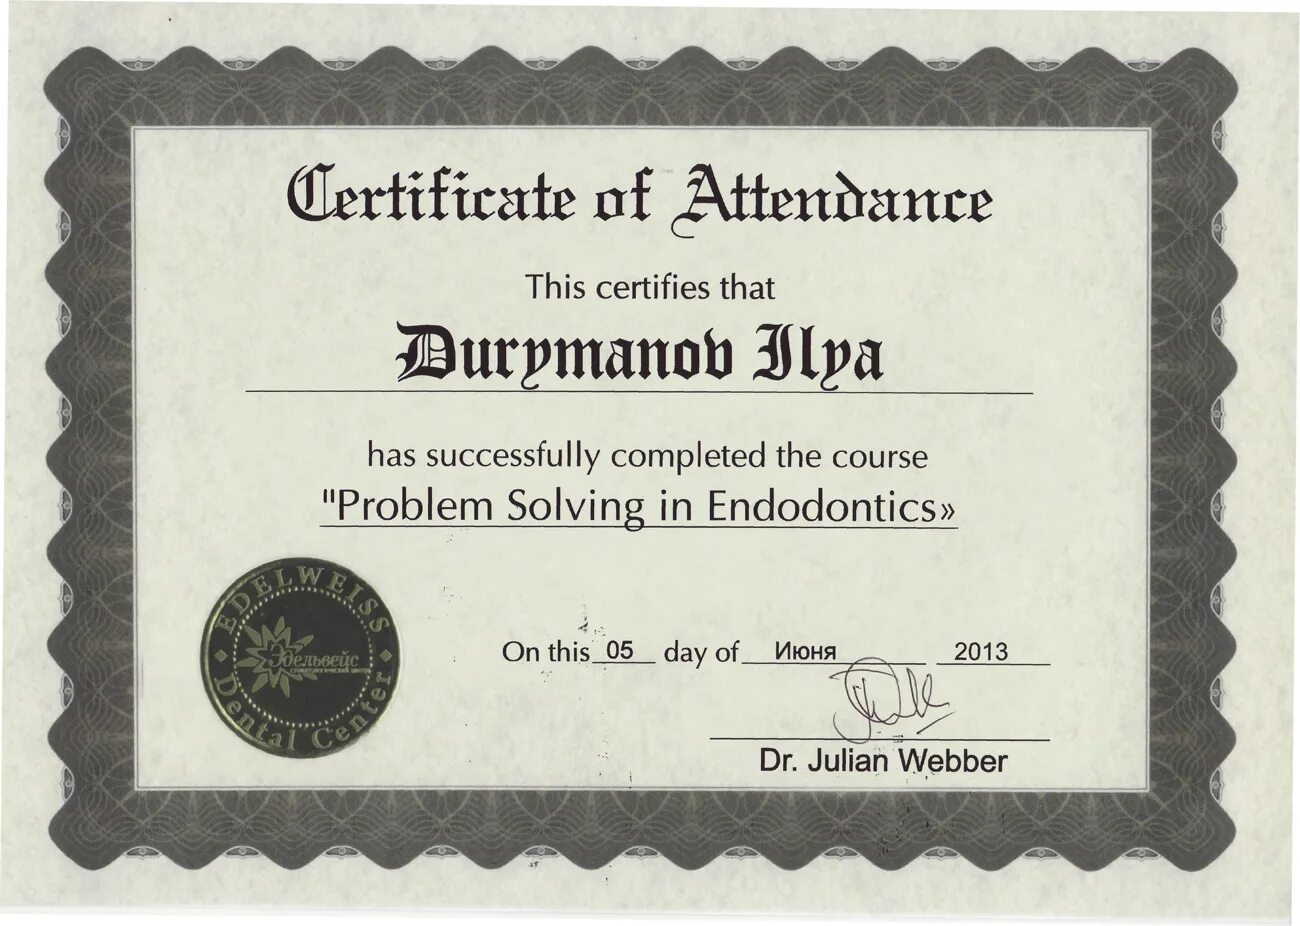 Certificate successfully completed the course. Has successfully completed. This certifies that has successfully completed on. Has successfully completed course.